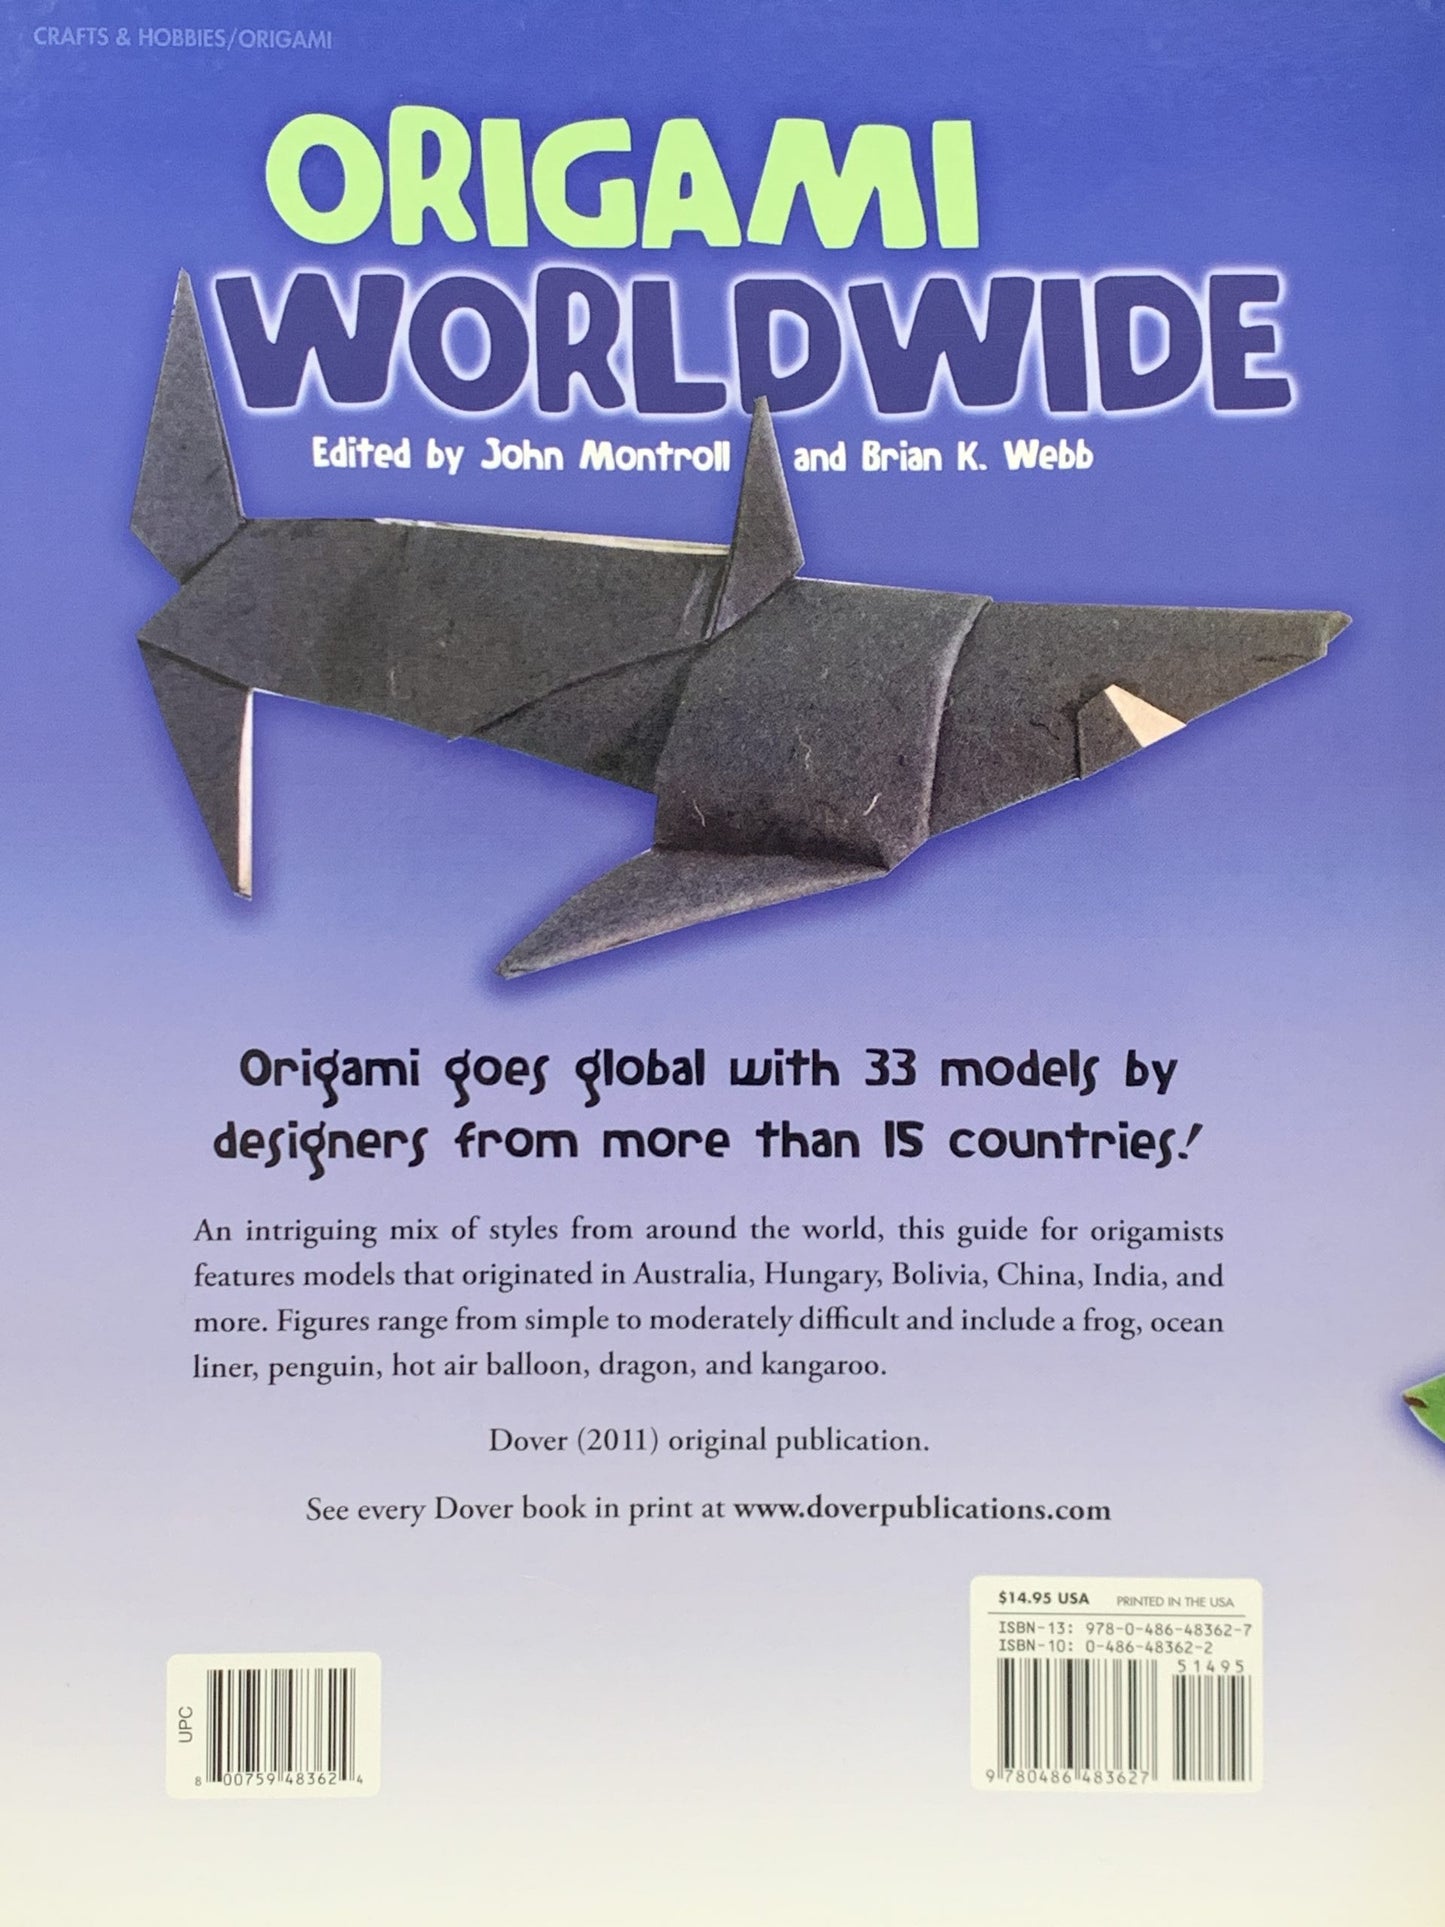 Origami Worldwide + Large Paper Combo